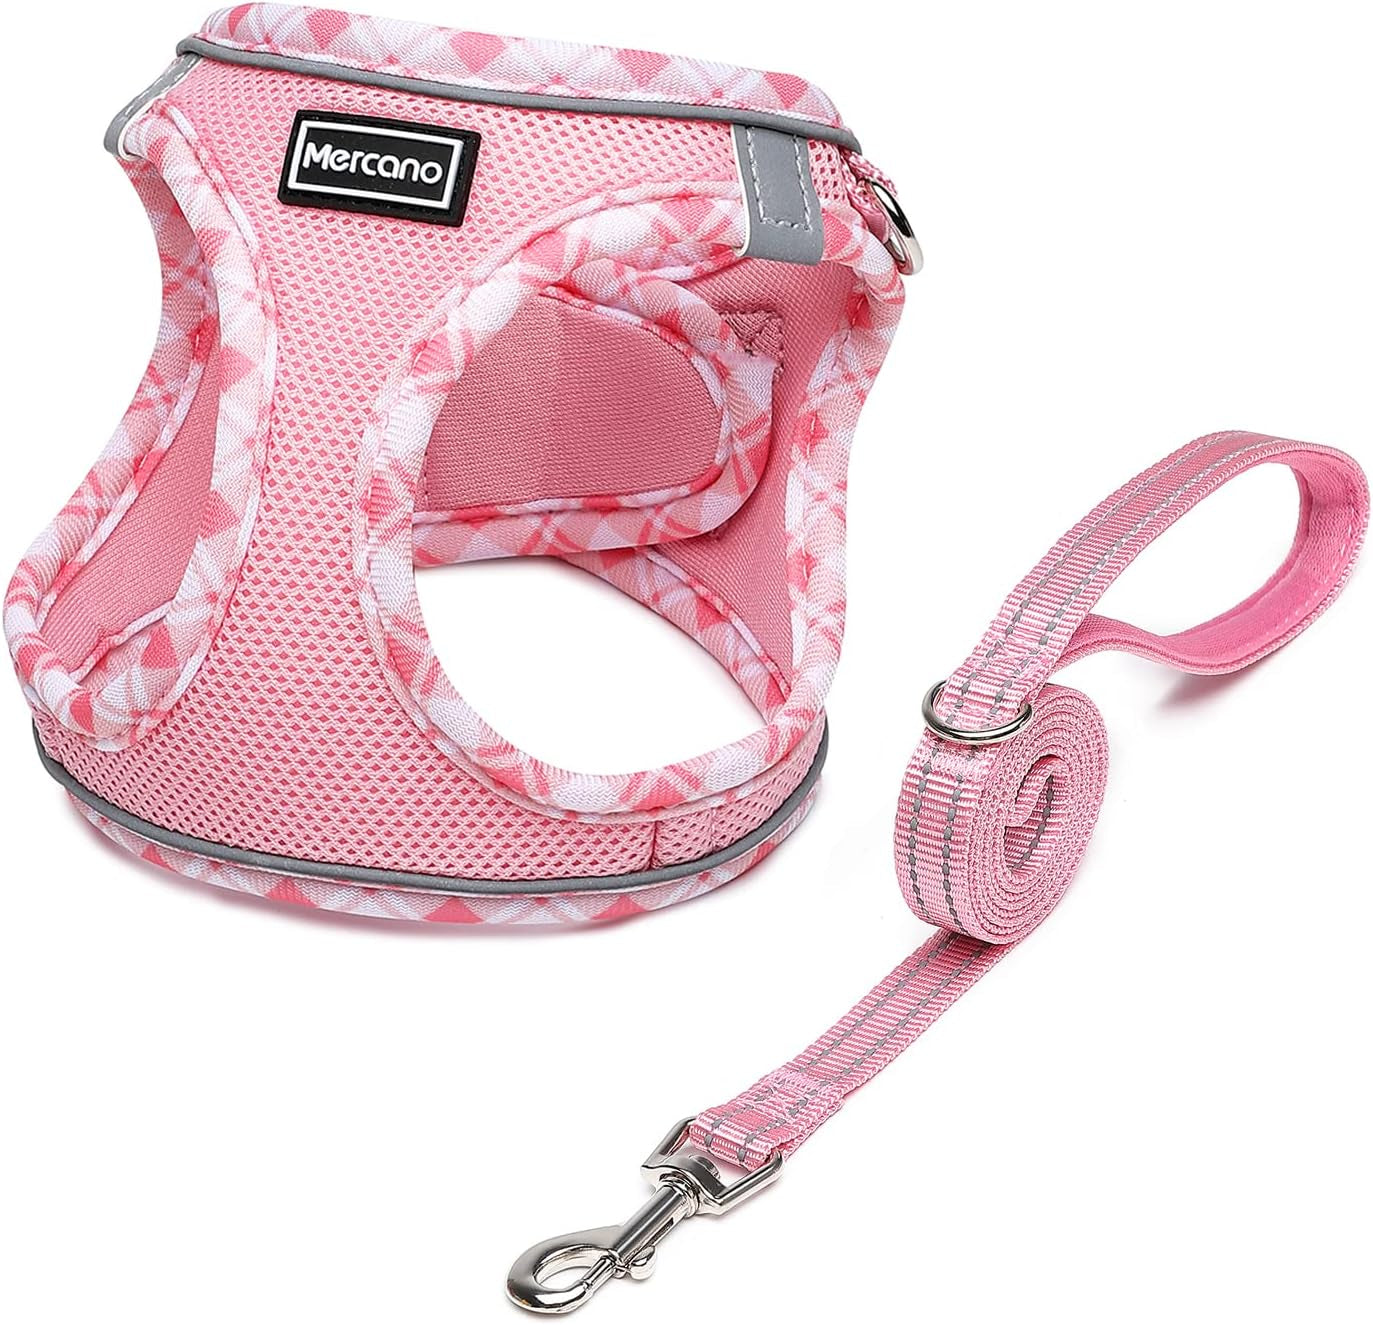 Soft Mesh Dog Harness and Leash Set, No-Chock Step-In Reflective Breathable Lightweight Easy Walk Escape Proof Vest Harnesses with Safety Buckle for Small Medium Dogs, Cats (Pink, S)